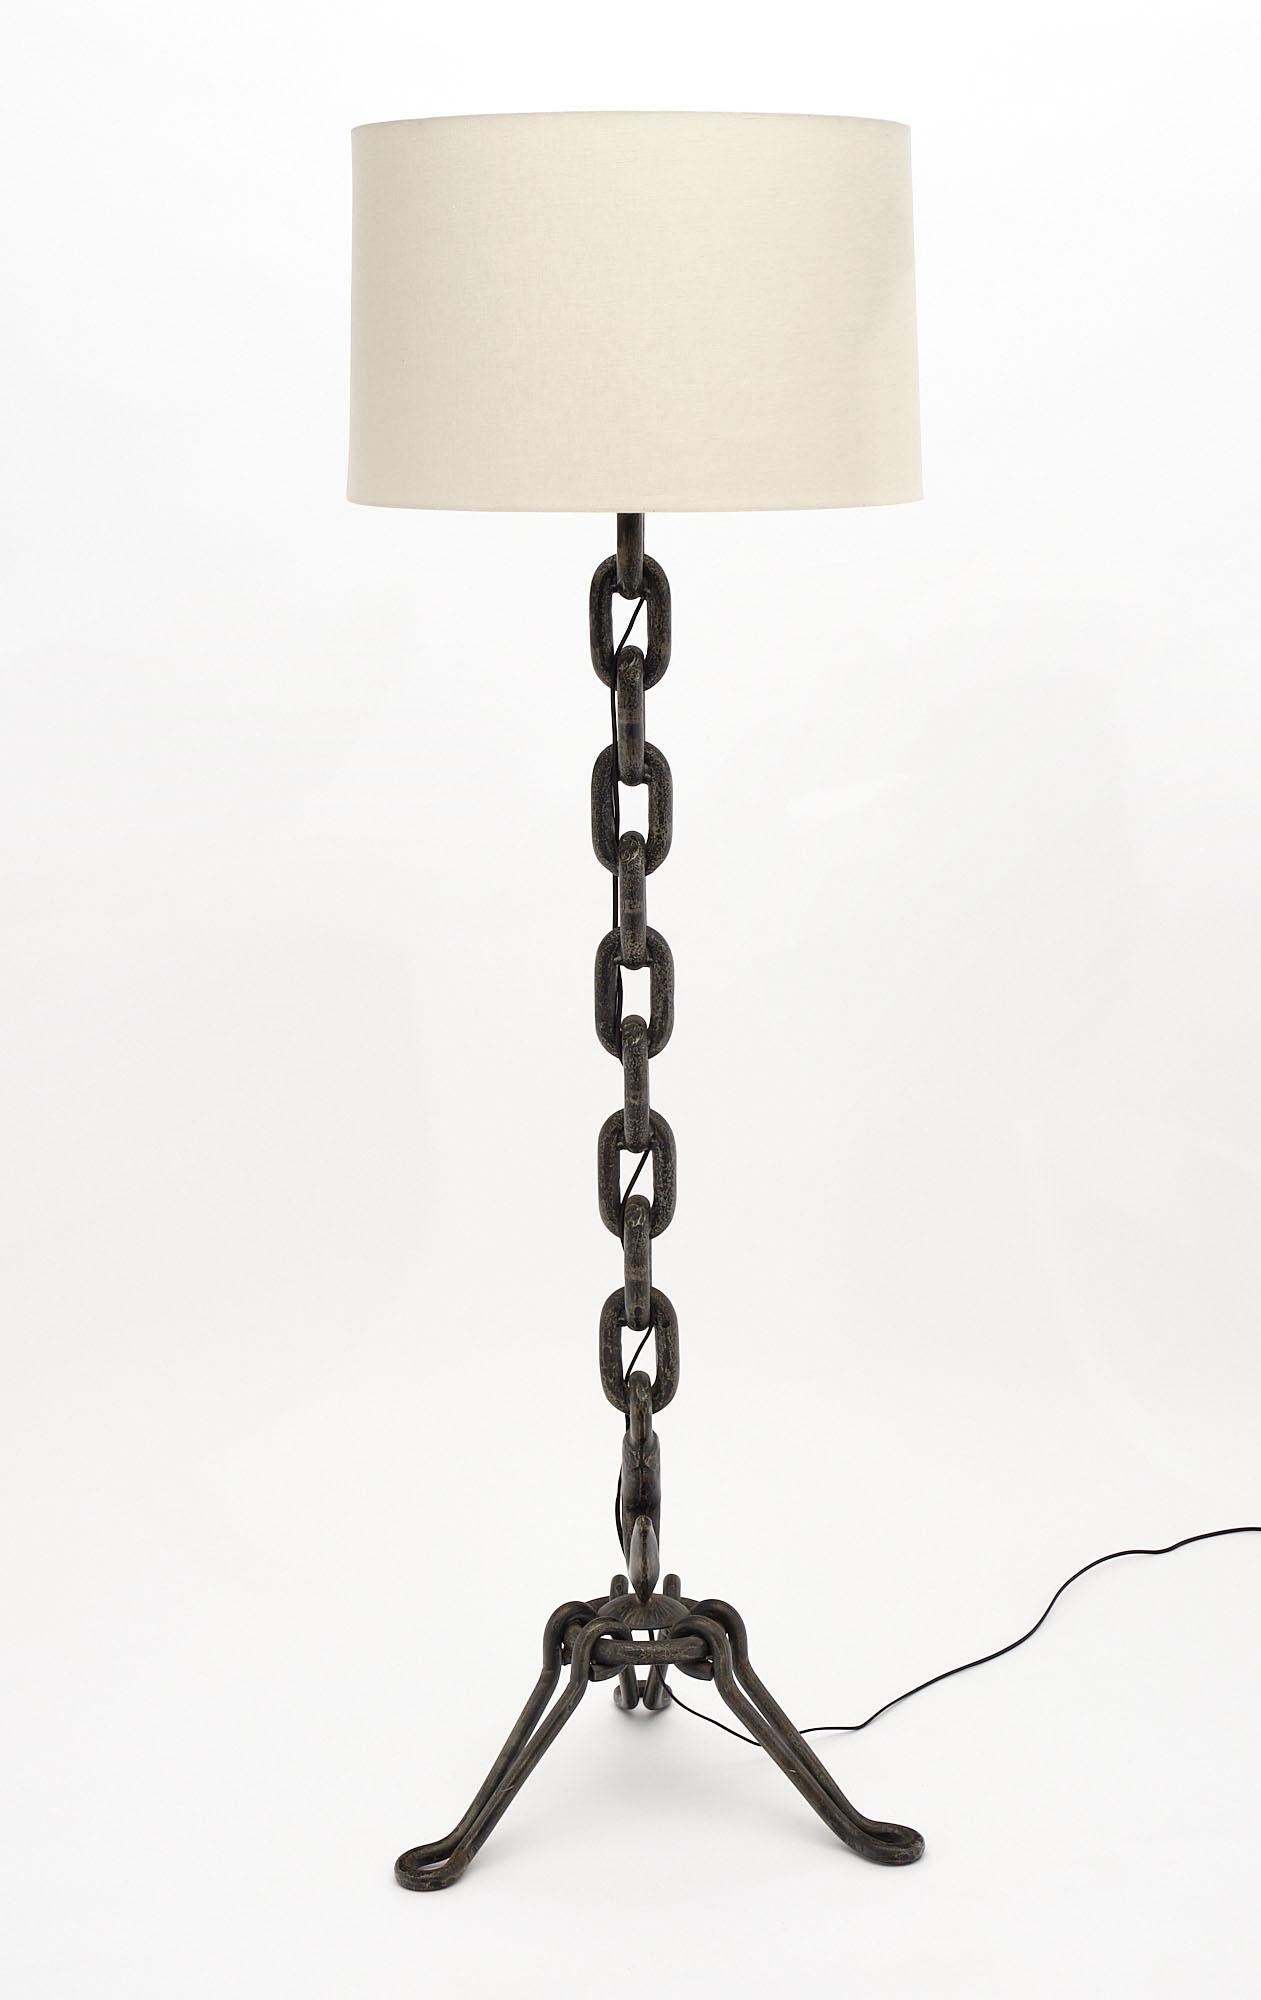 Floor lamp in the French Industrial style made of cast iron featuring a line of chain links with a hook above the tripod base. This piece has been newly wired to US standards.